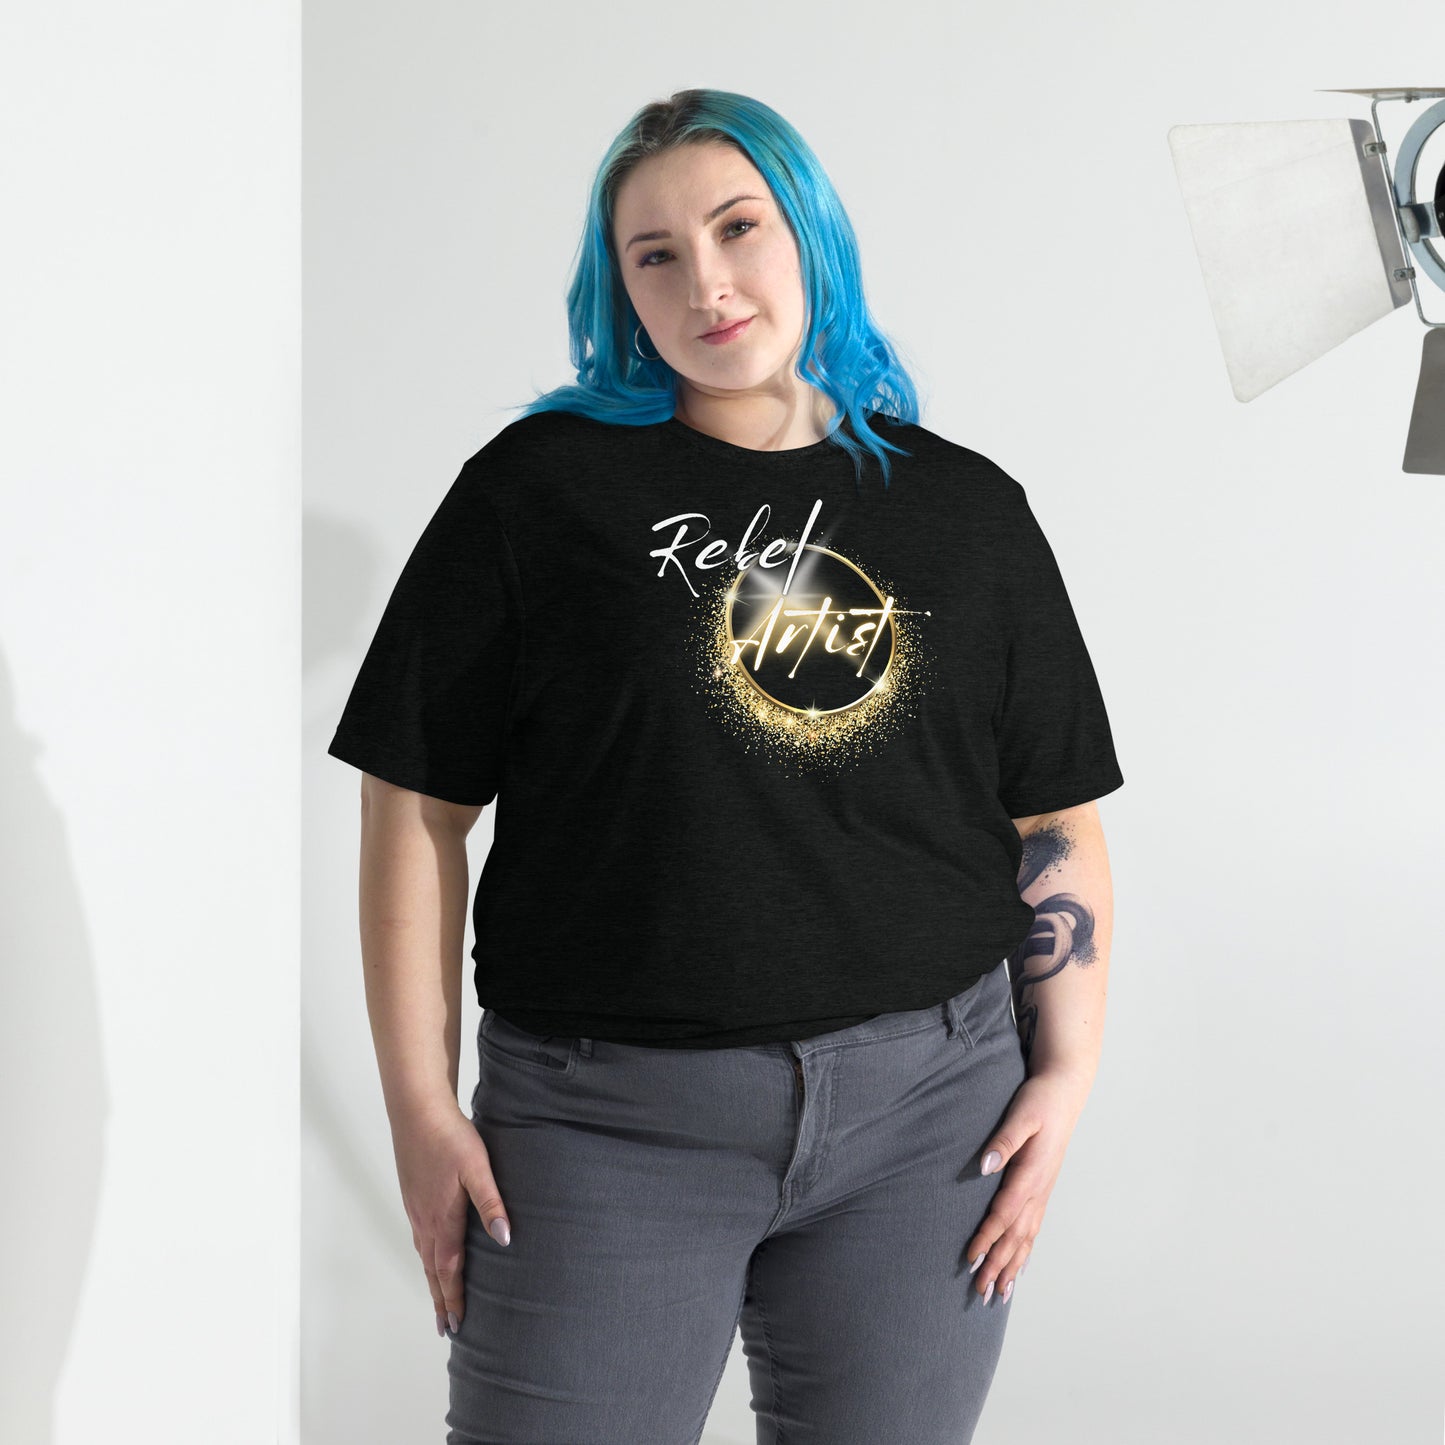 Rebel Artist Short Sleeve T-Shirt: A dynamic, lightning bolt-inspired design in Solid Black, Charcoal Black, and Emerald colors. Crafted from airy triblend fabric for ultimate comfort and freedom. Unleash your creativity and courage with this expressive and liberating t-shirt. ⚡🖤🌑 #FashionFreedom #RebelArtistApparel #plussize